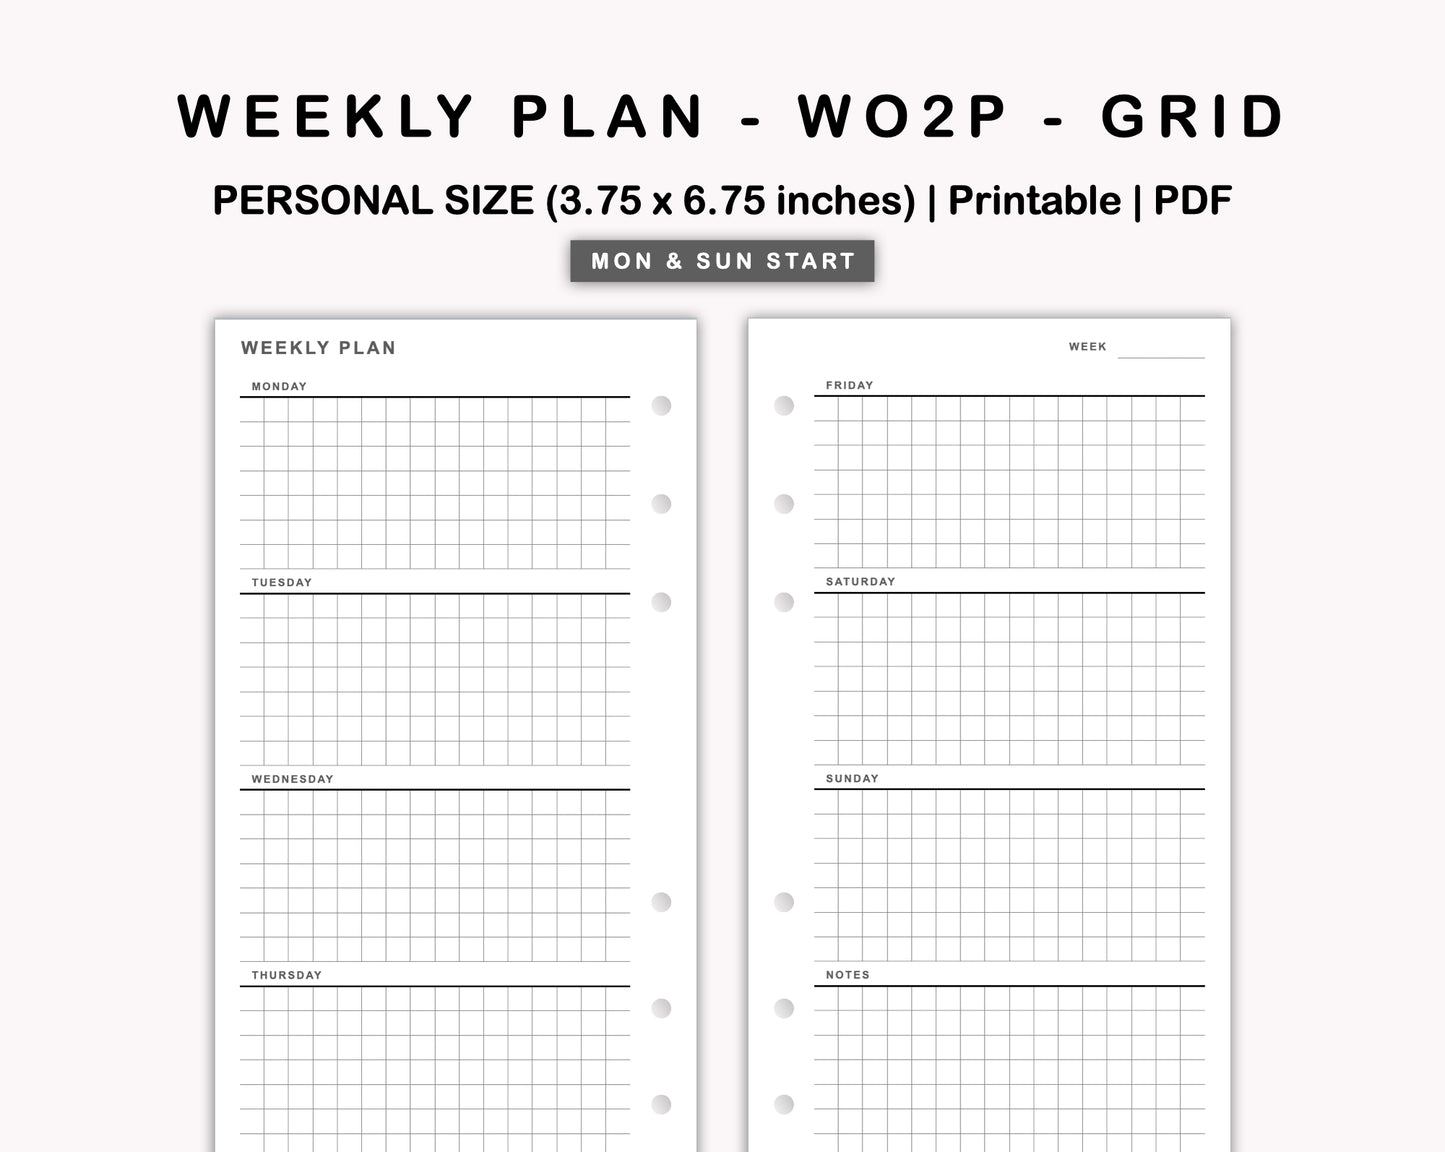 Personal Inserts - Weekly Plan - WO2P - Grid